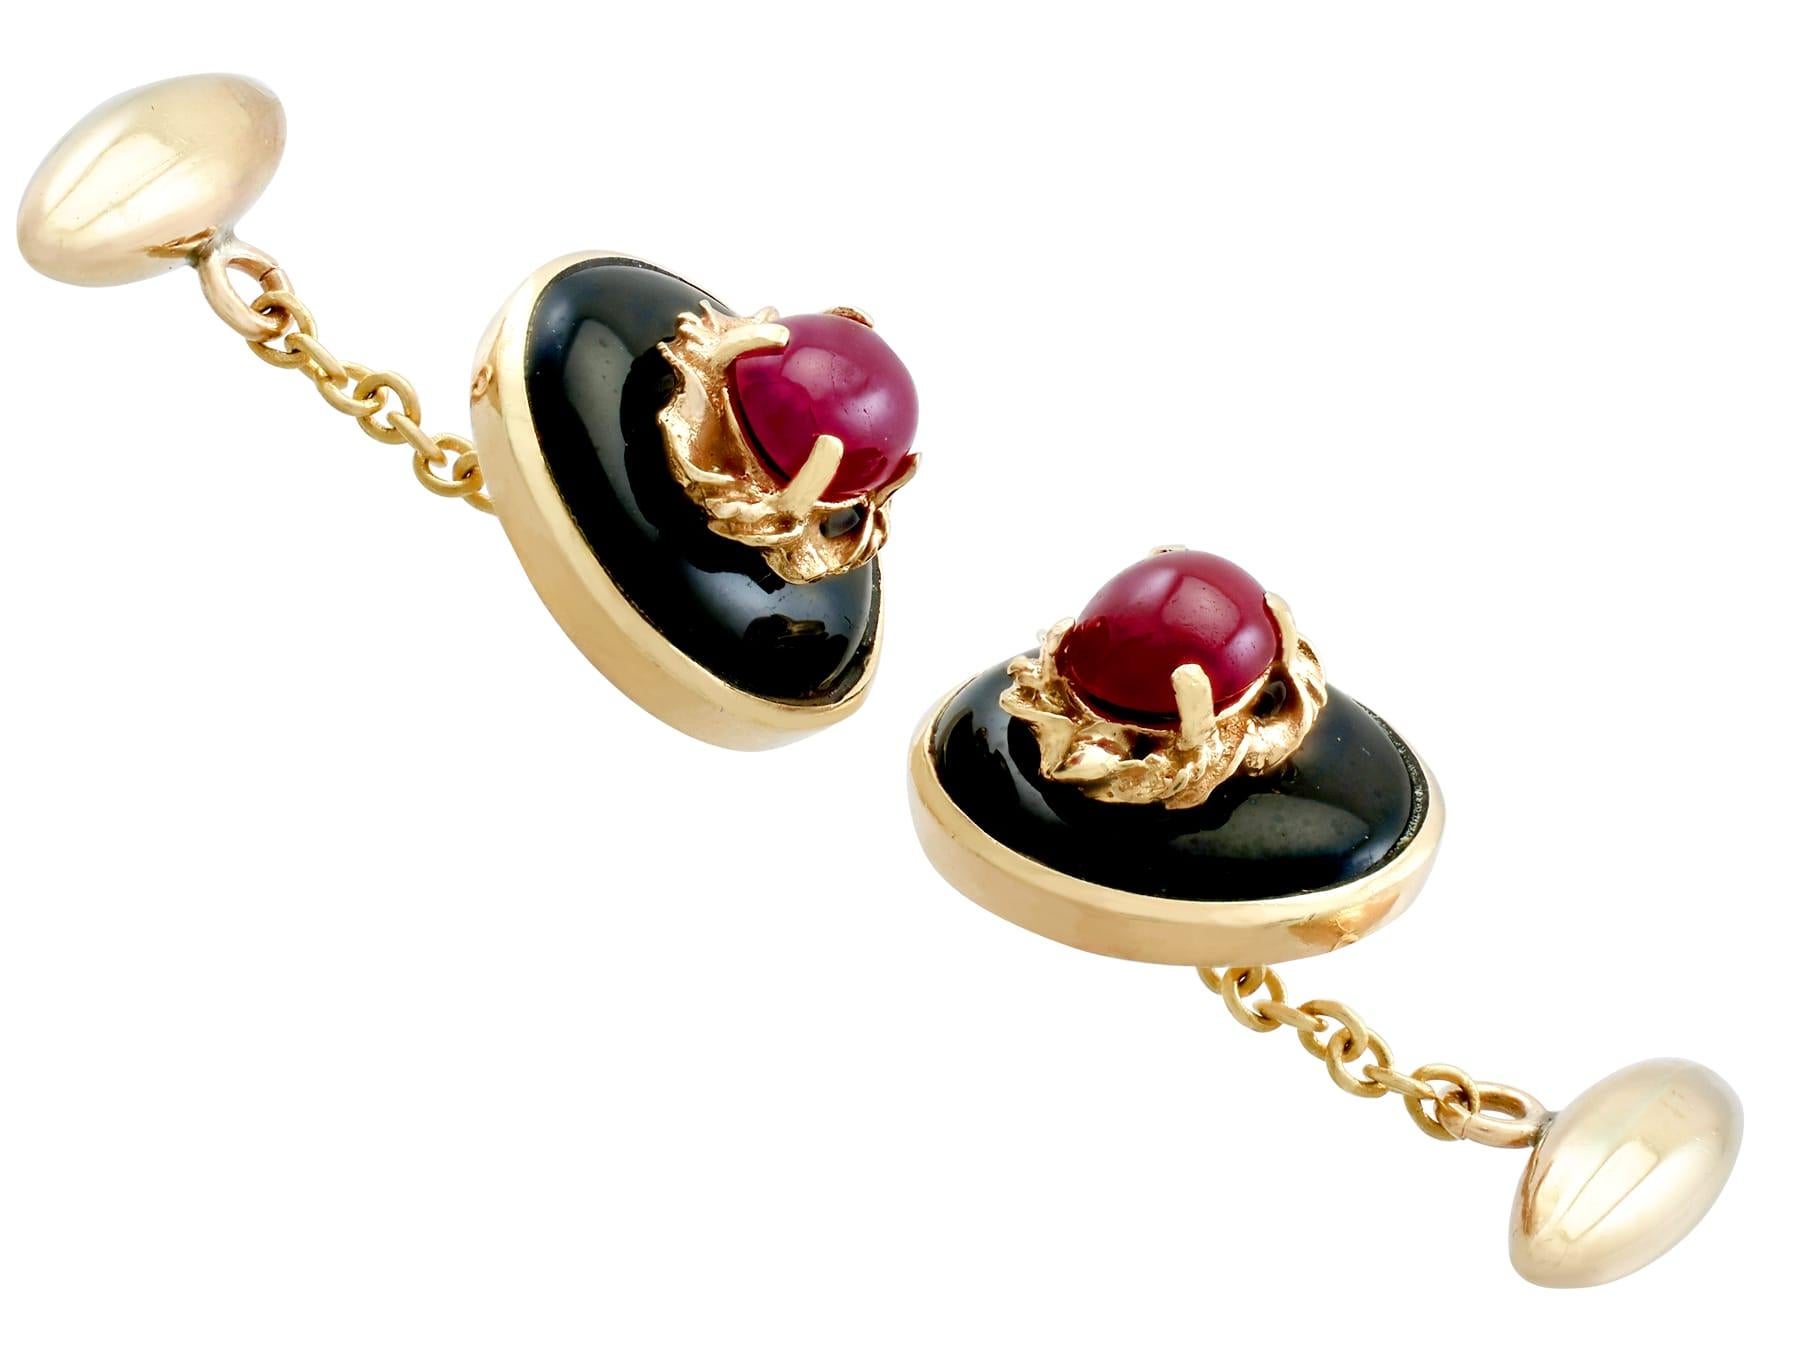 Italian 1.75 Carat Ruby and Onyx Yellow Gold Cufflinks In Excellent Condition For Sale In Jesmond, Newcastle Upon Tyne